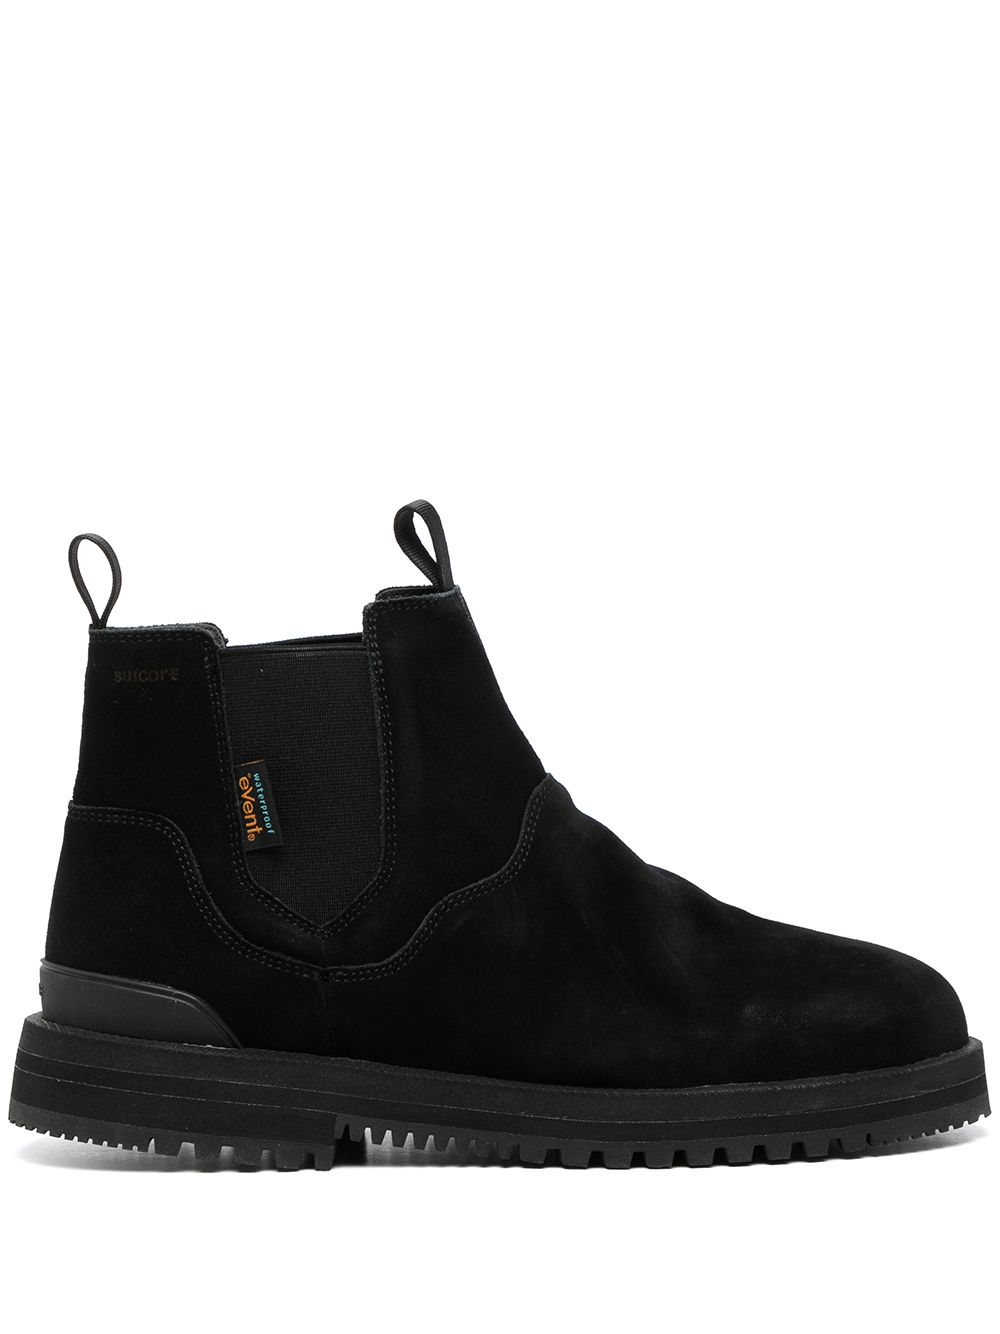 Image 1 of Suicoke GORE-Sevab ankle boots